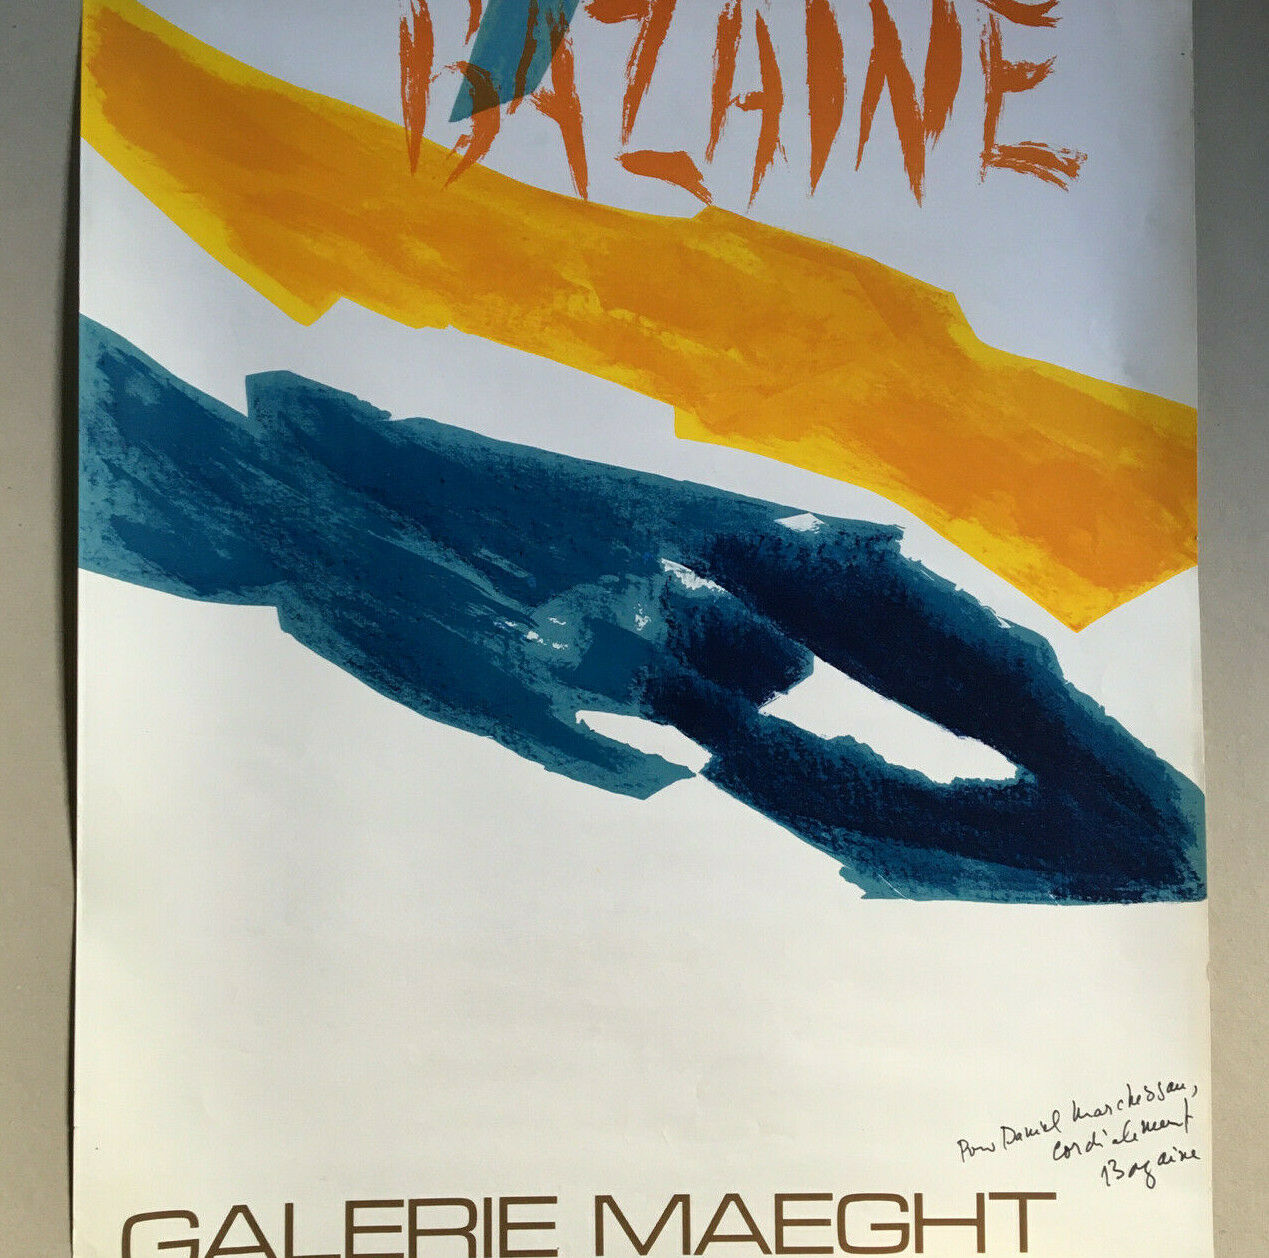 Bazaine — Signed exhibition poster — Maeght gallery — 53.5x74 cm — 1972.